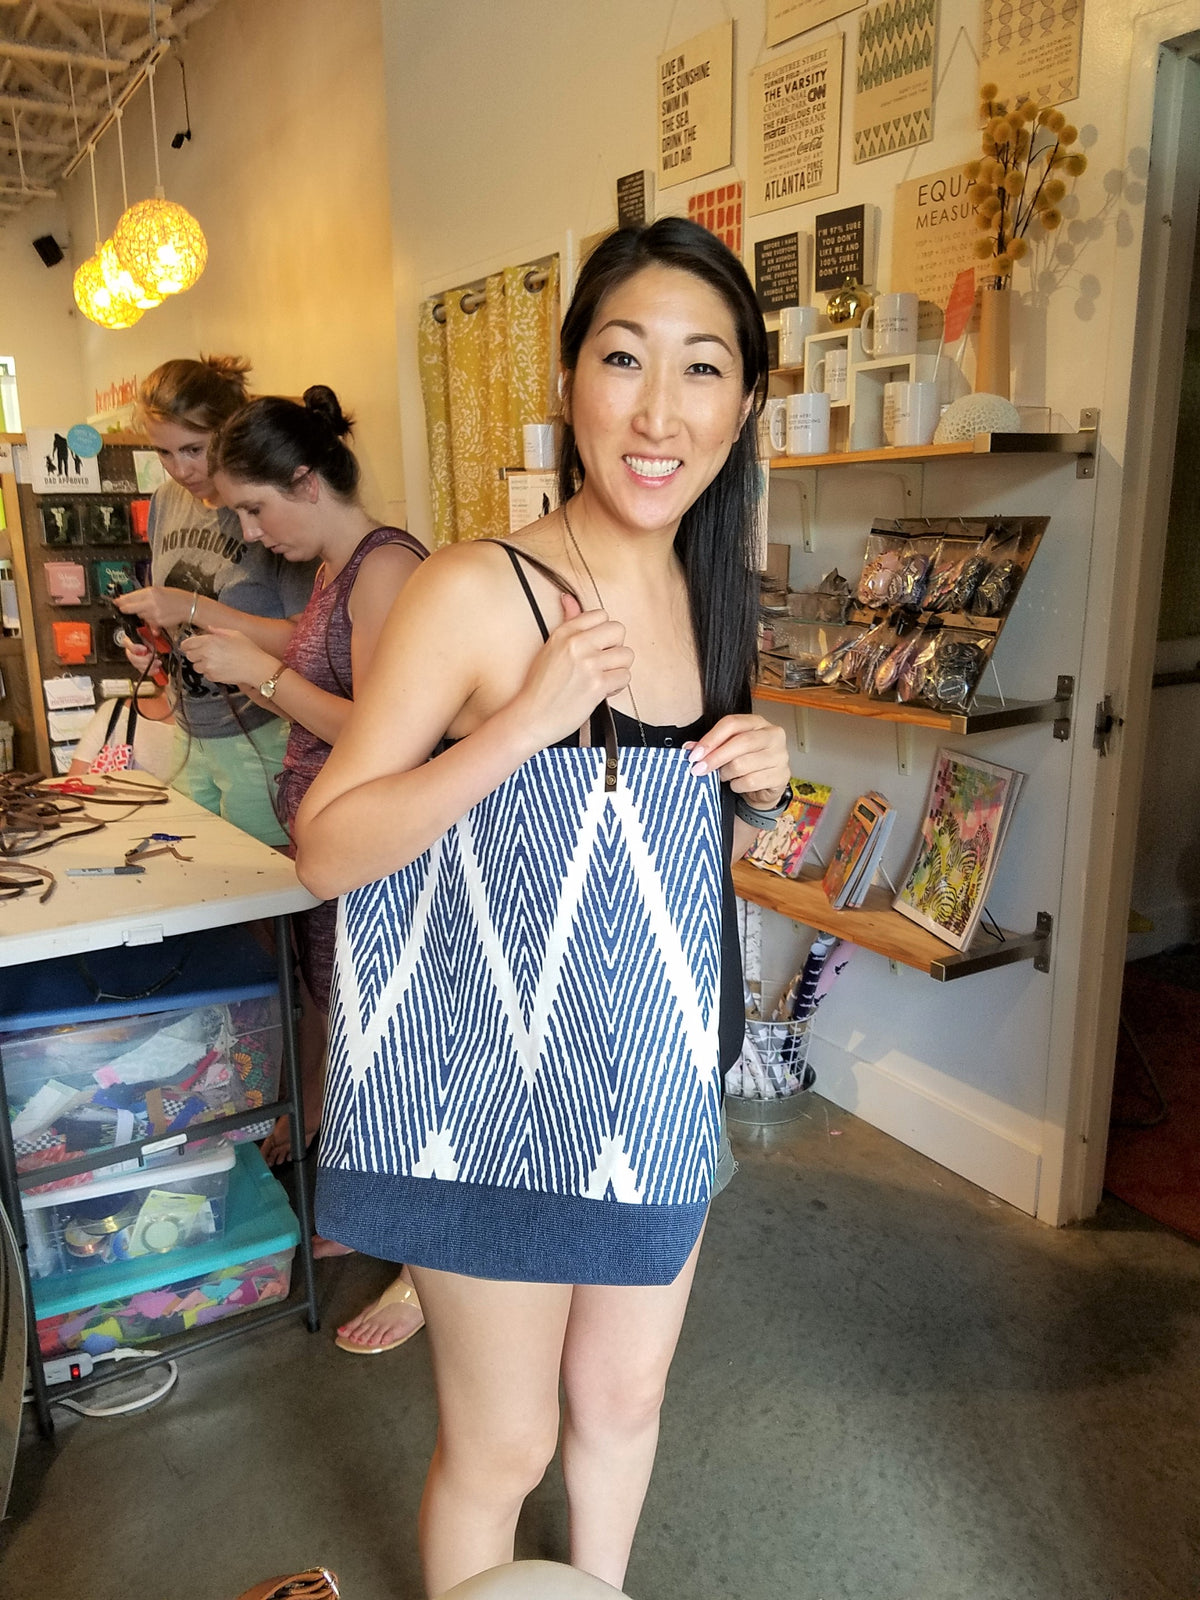 Sewing 102: Leather Handled Totes